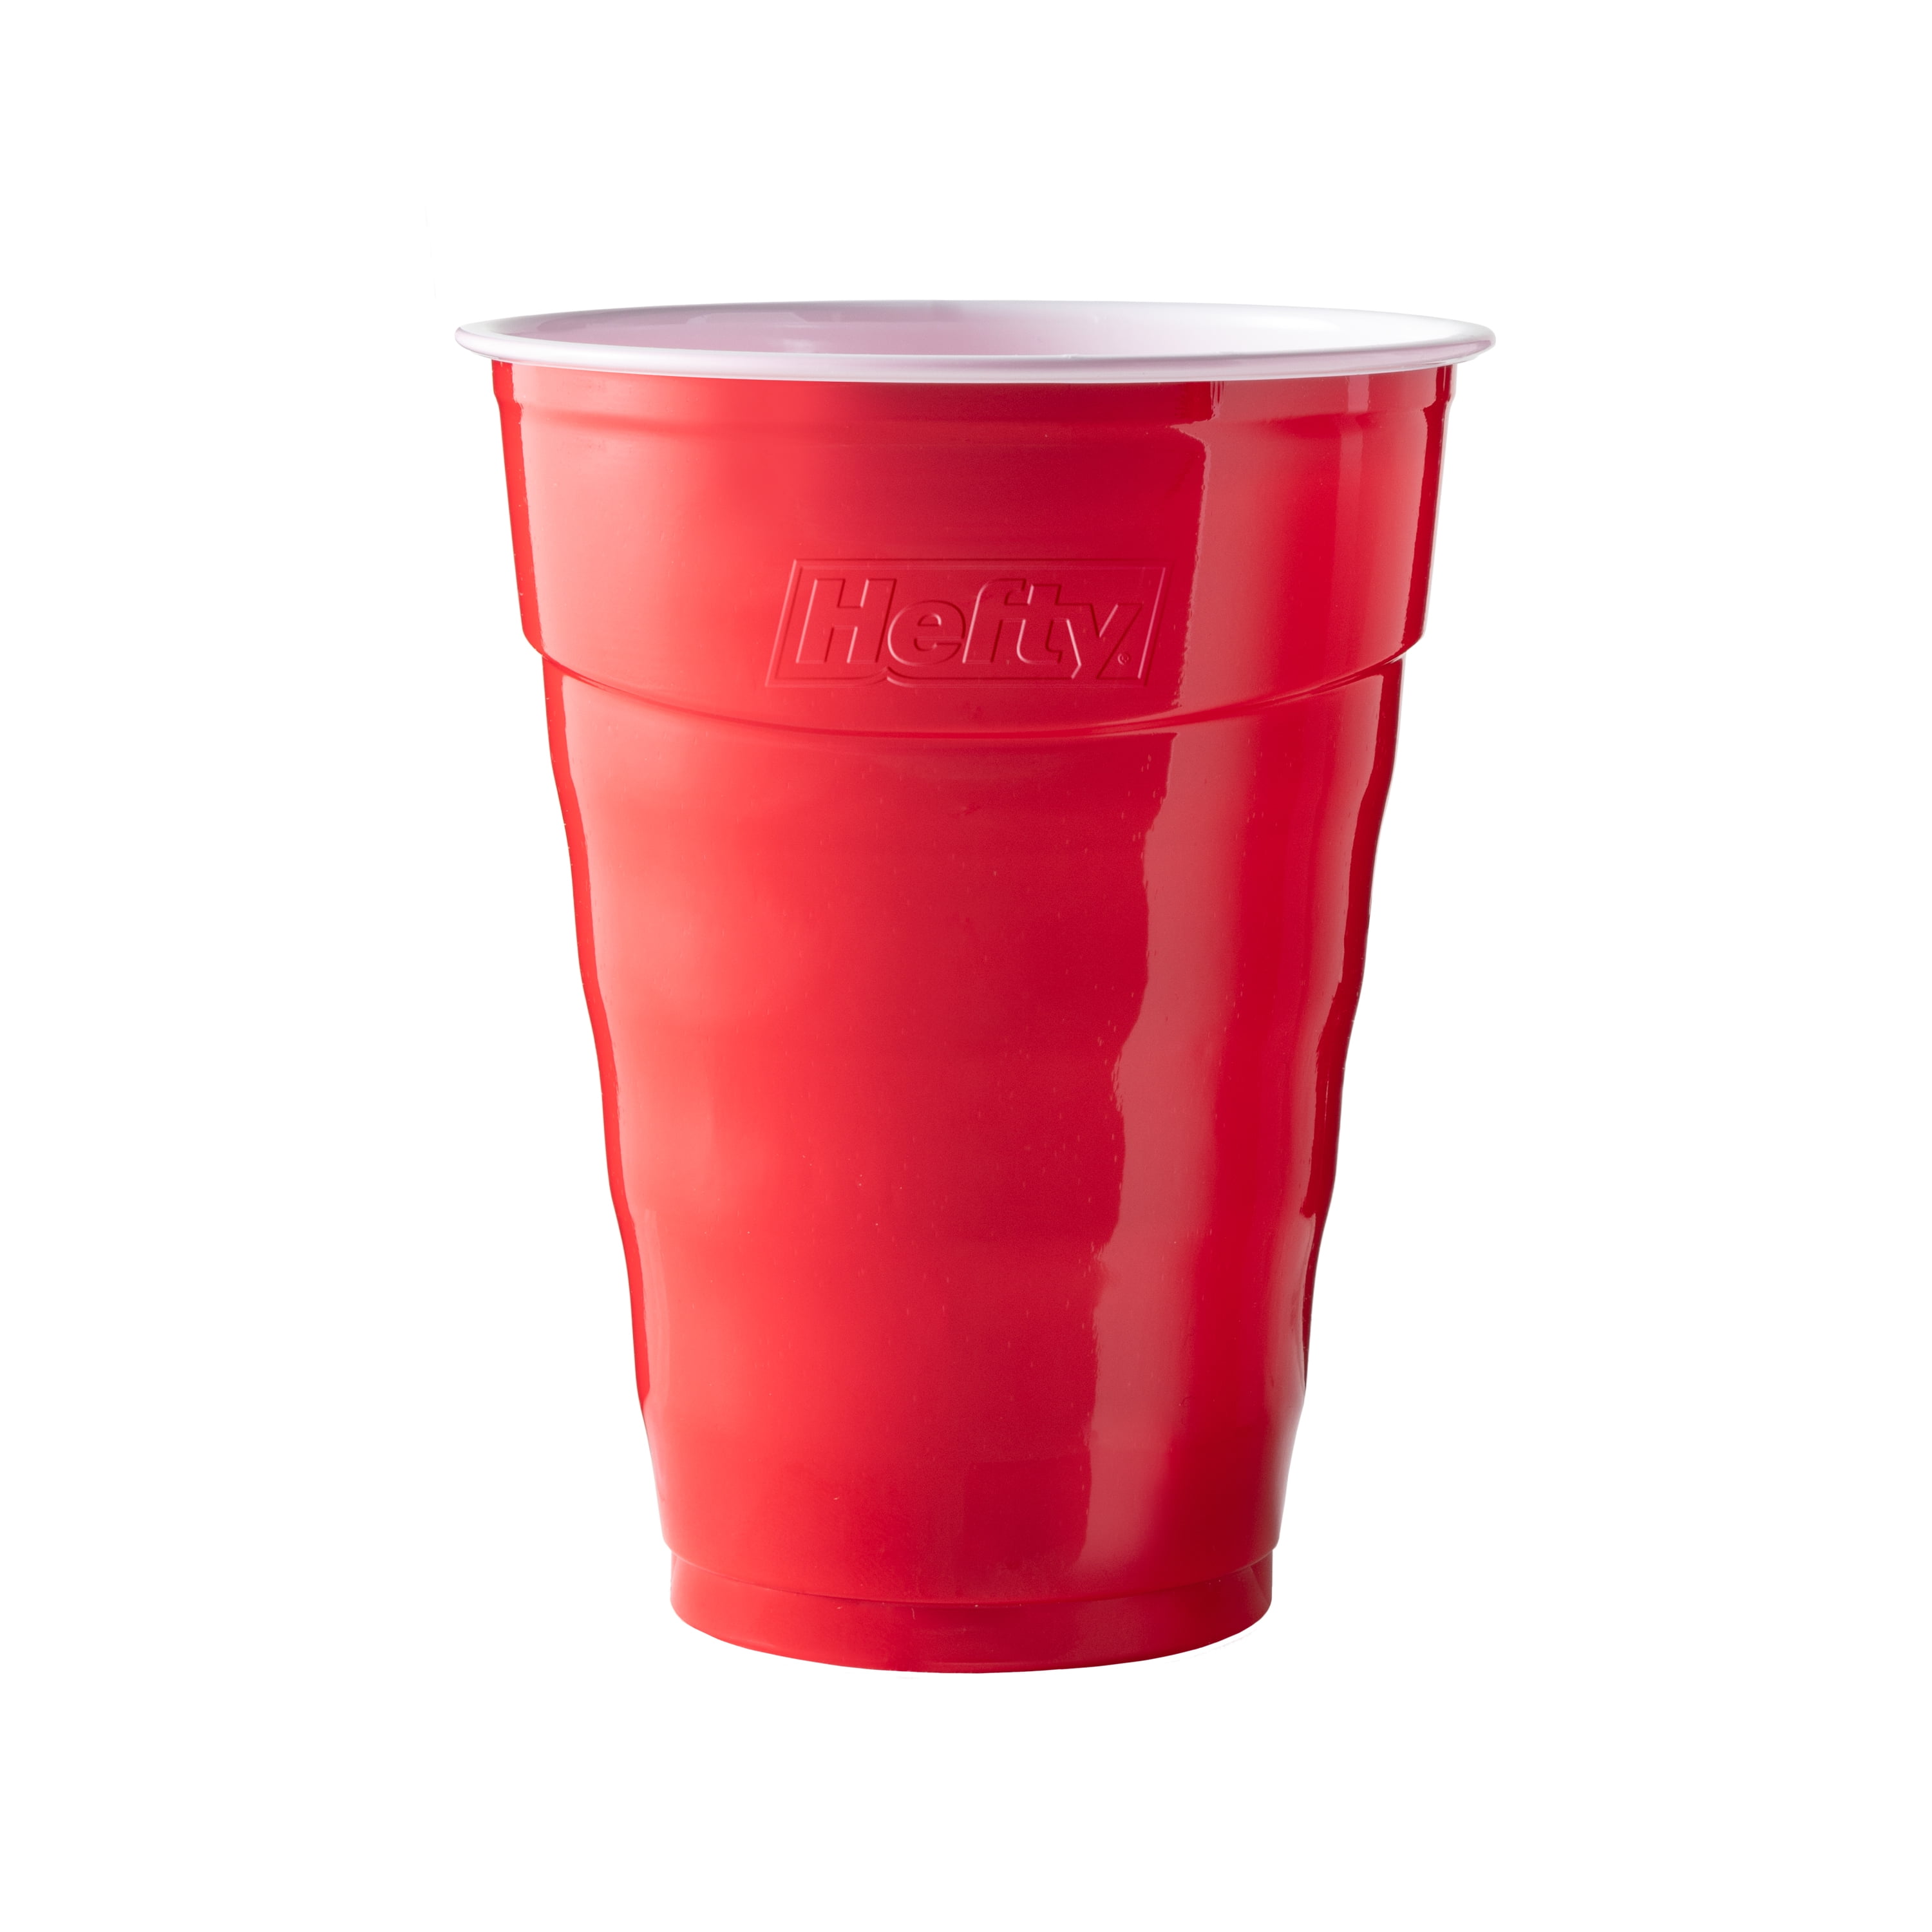 Hefty Party On Disposable Plastic Cups, Red, 18 Ounce, 25 Count